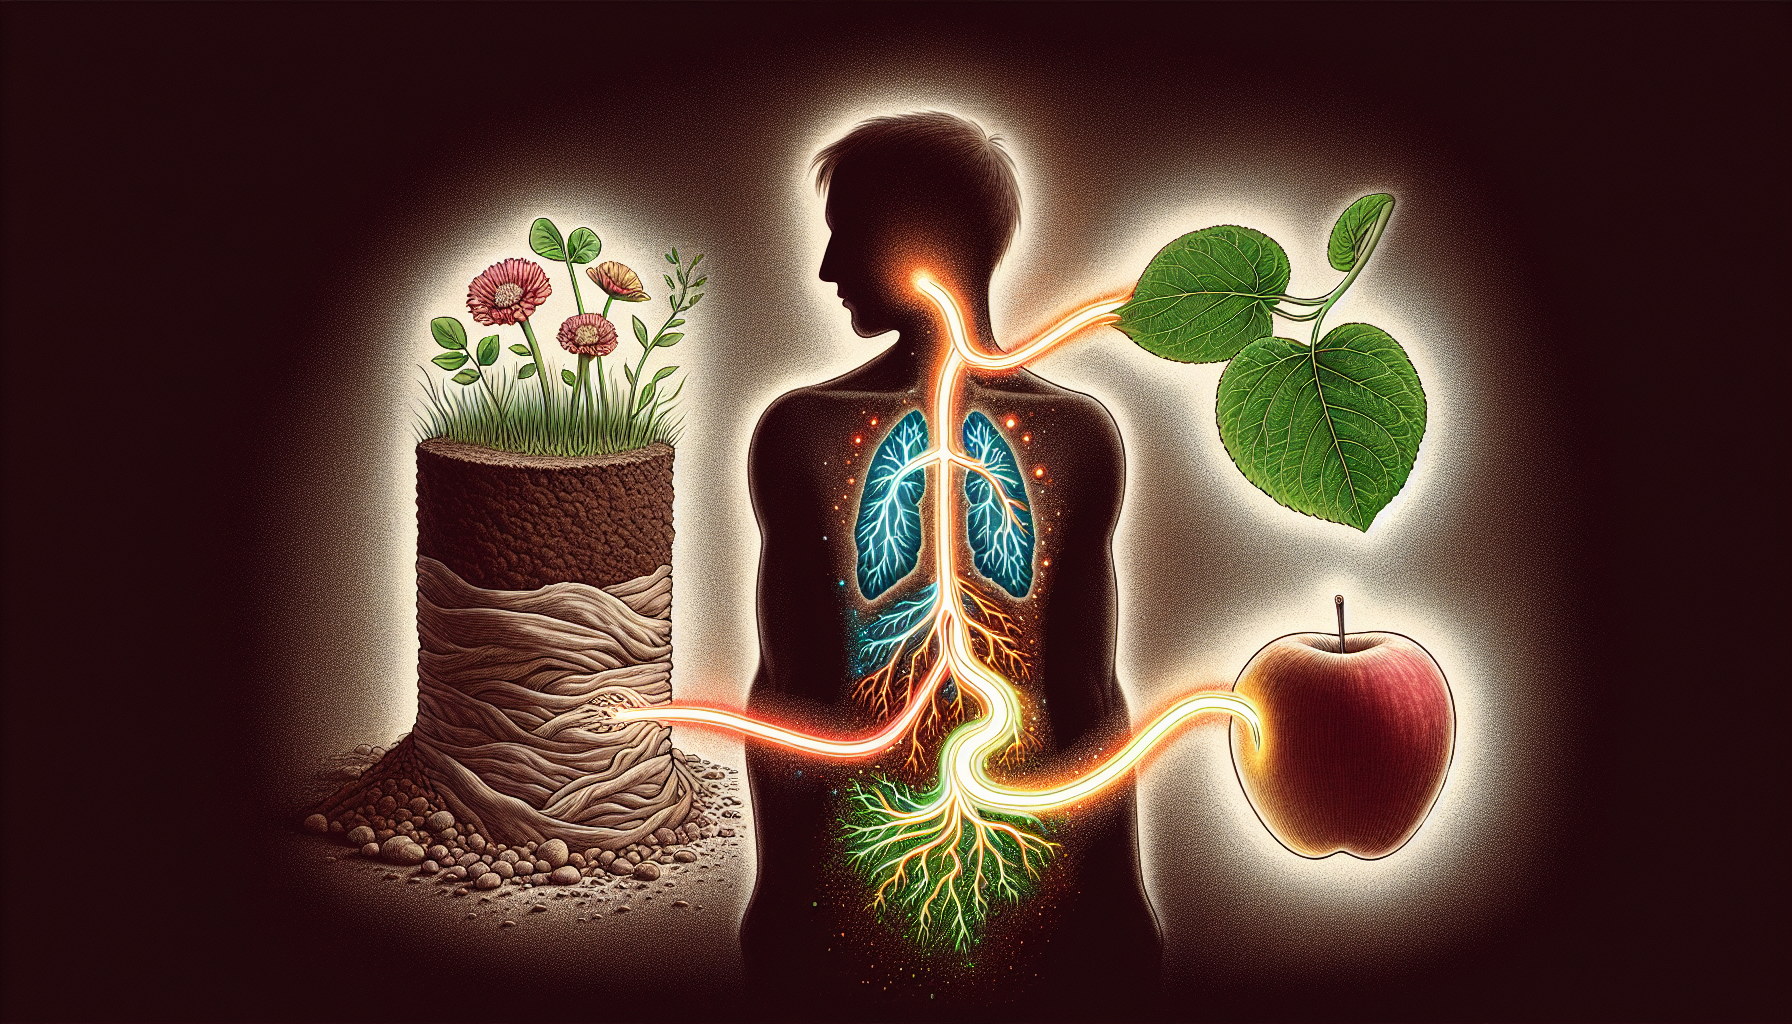 Illustration of ancient peat and apple extracts